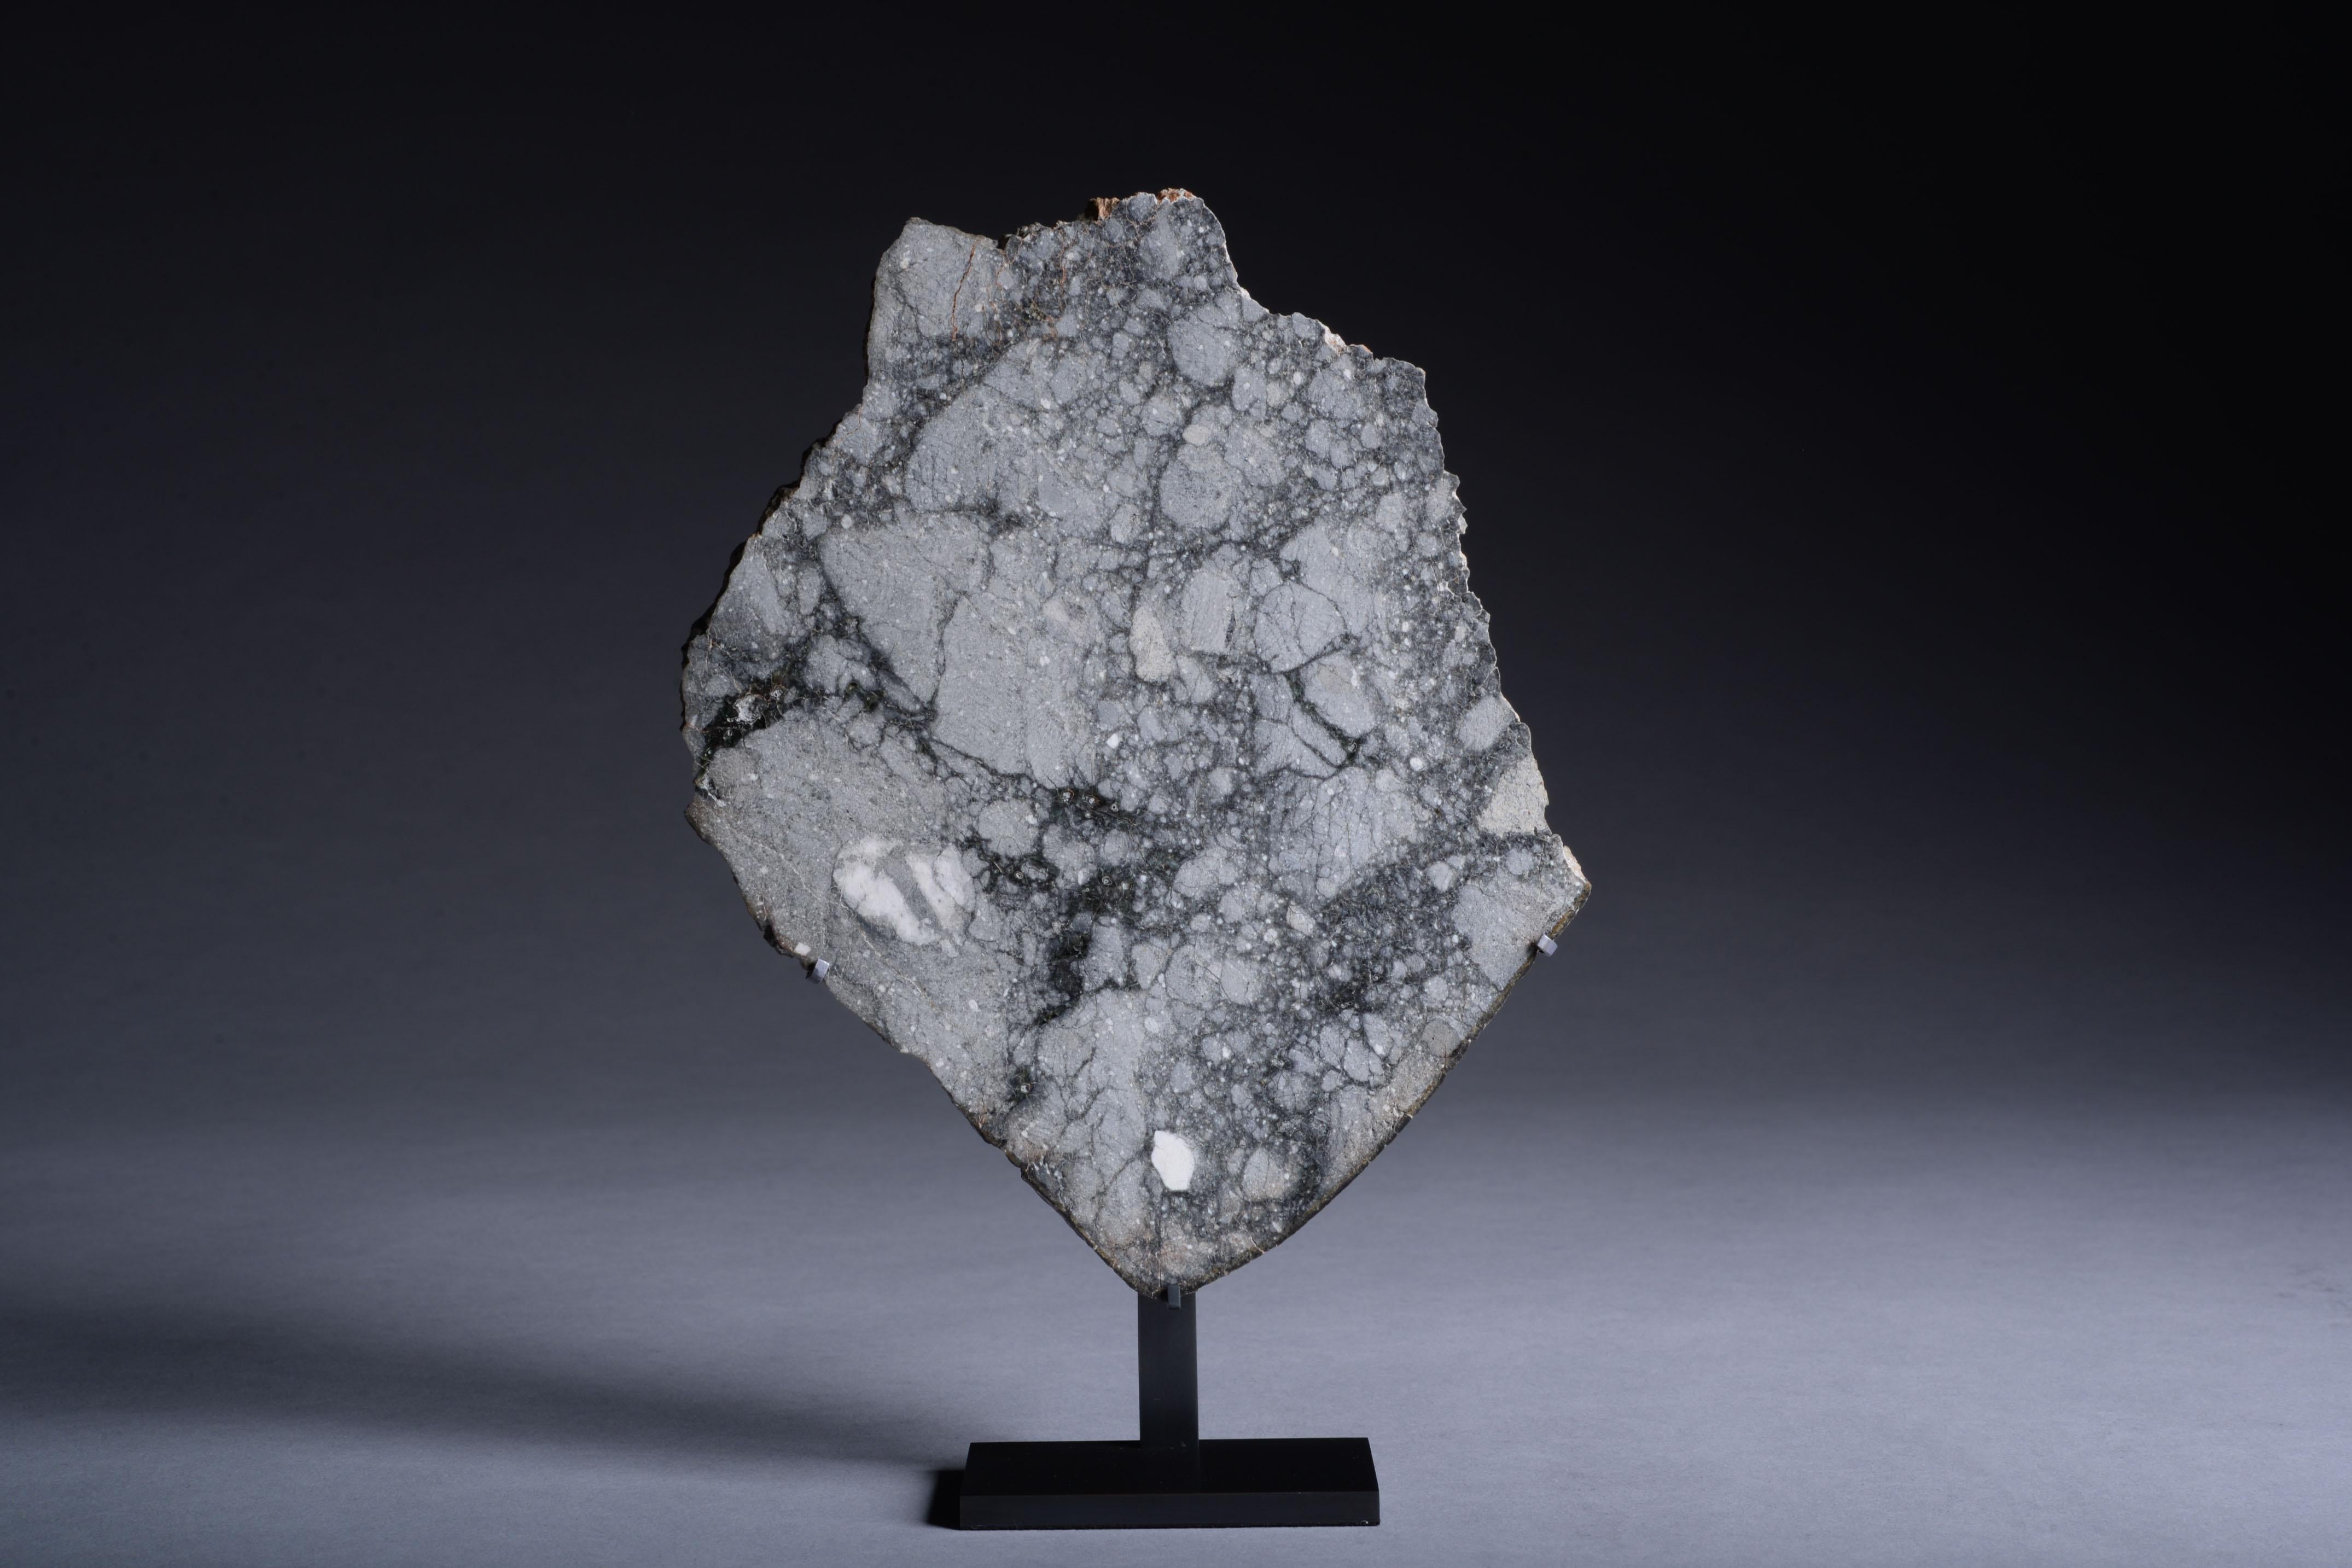 “This 149-gram slice of the Gadamis 004 lunar meteorite contains a wide variety of sizes of light-colored angular anorthositic clasts. These silicate clasts are rich in aluminum and calcium and are derived from the lunar highlands, the light-colored